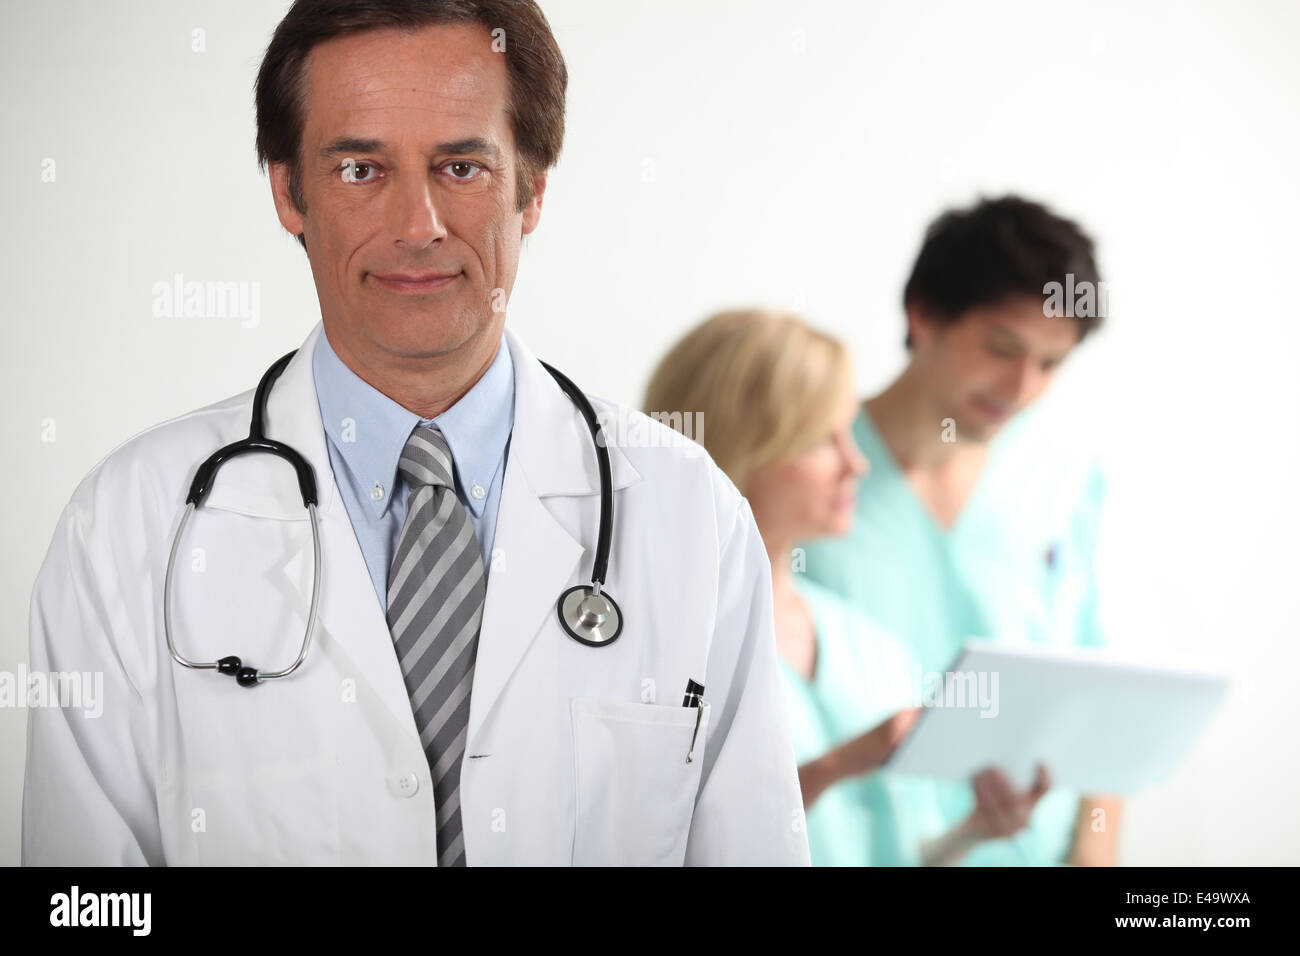 Doctor stood in front of colleagues Stock Photo